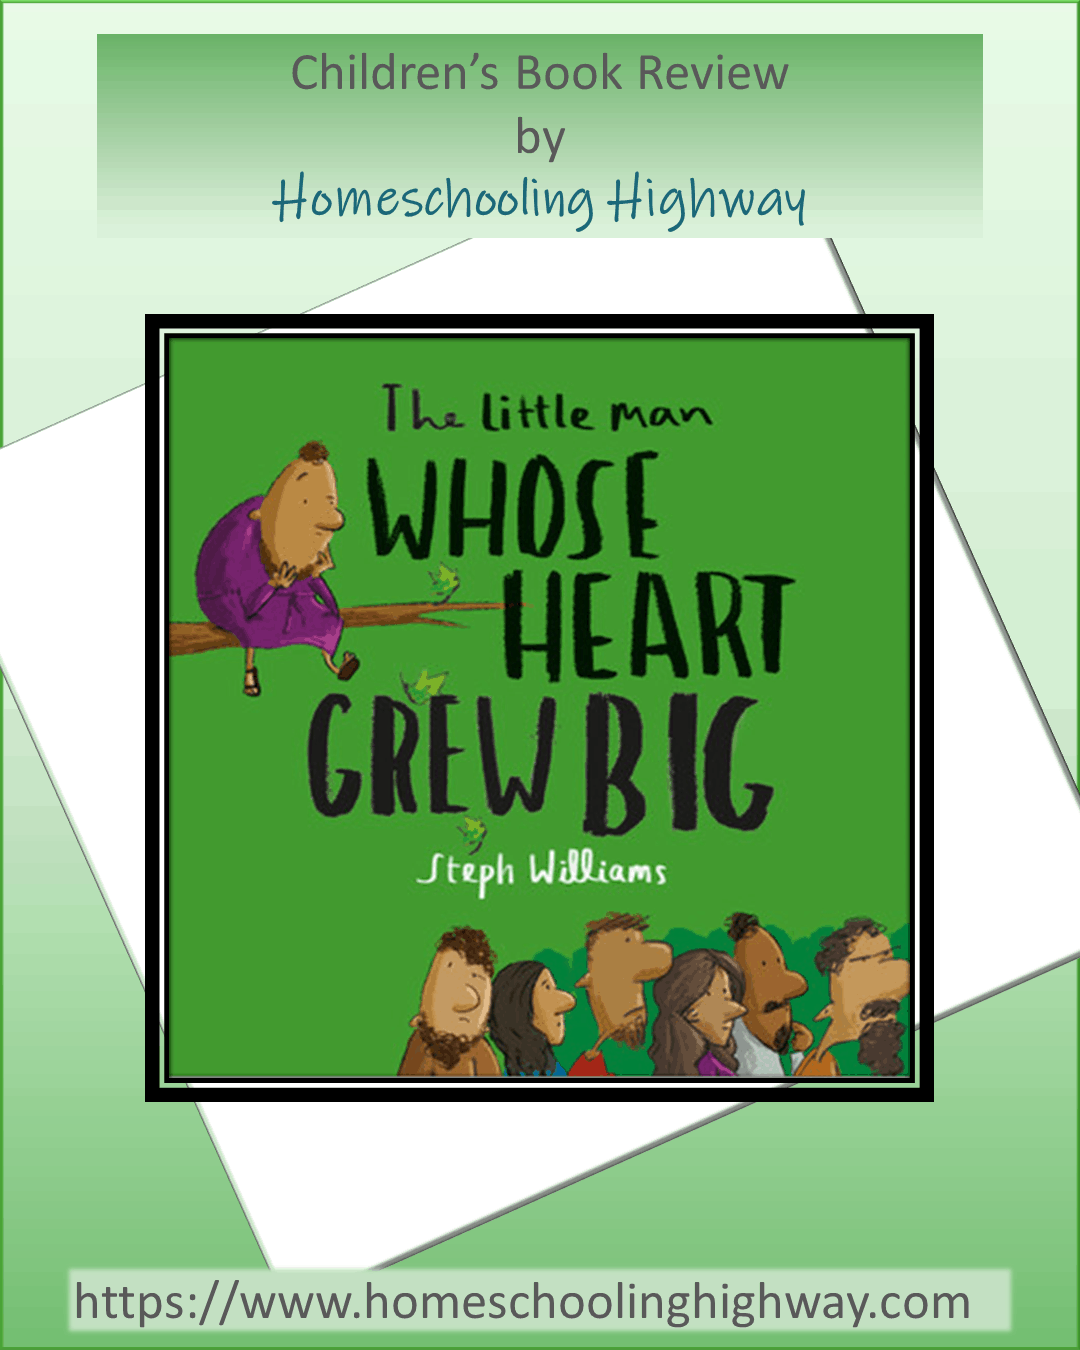 The Little Man Whose Heart Grew Big. A Children's Book Review by Homeschooling Highway